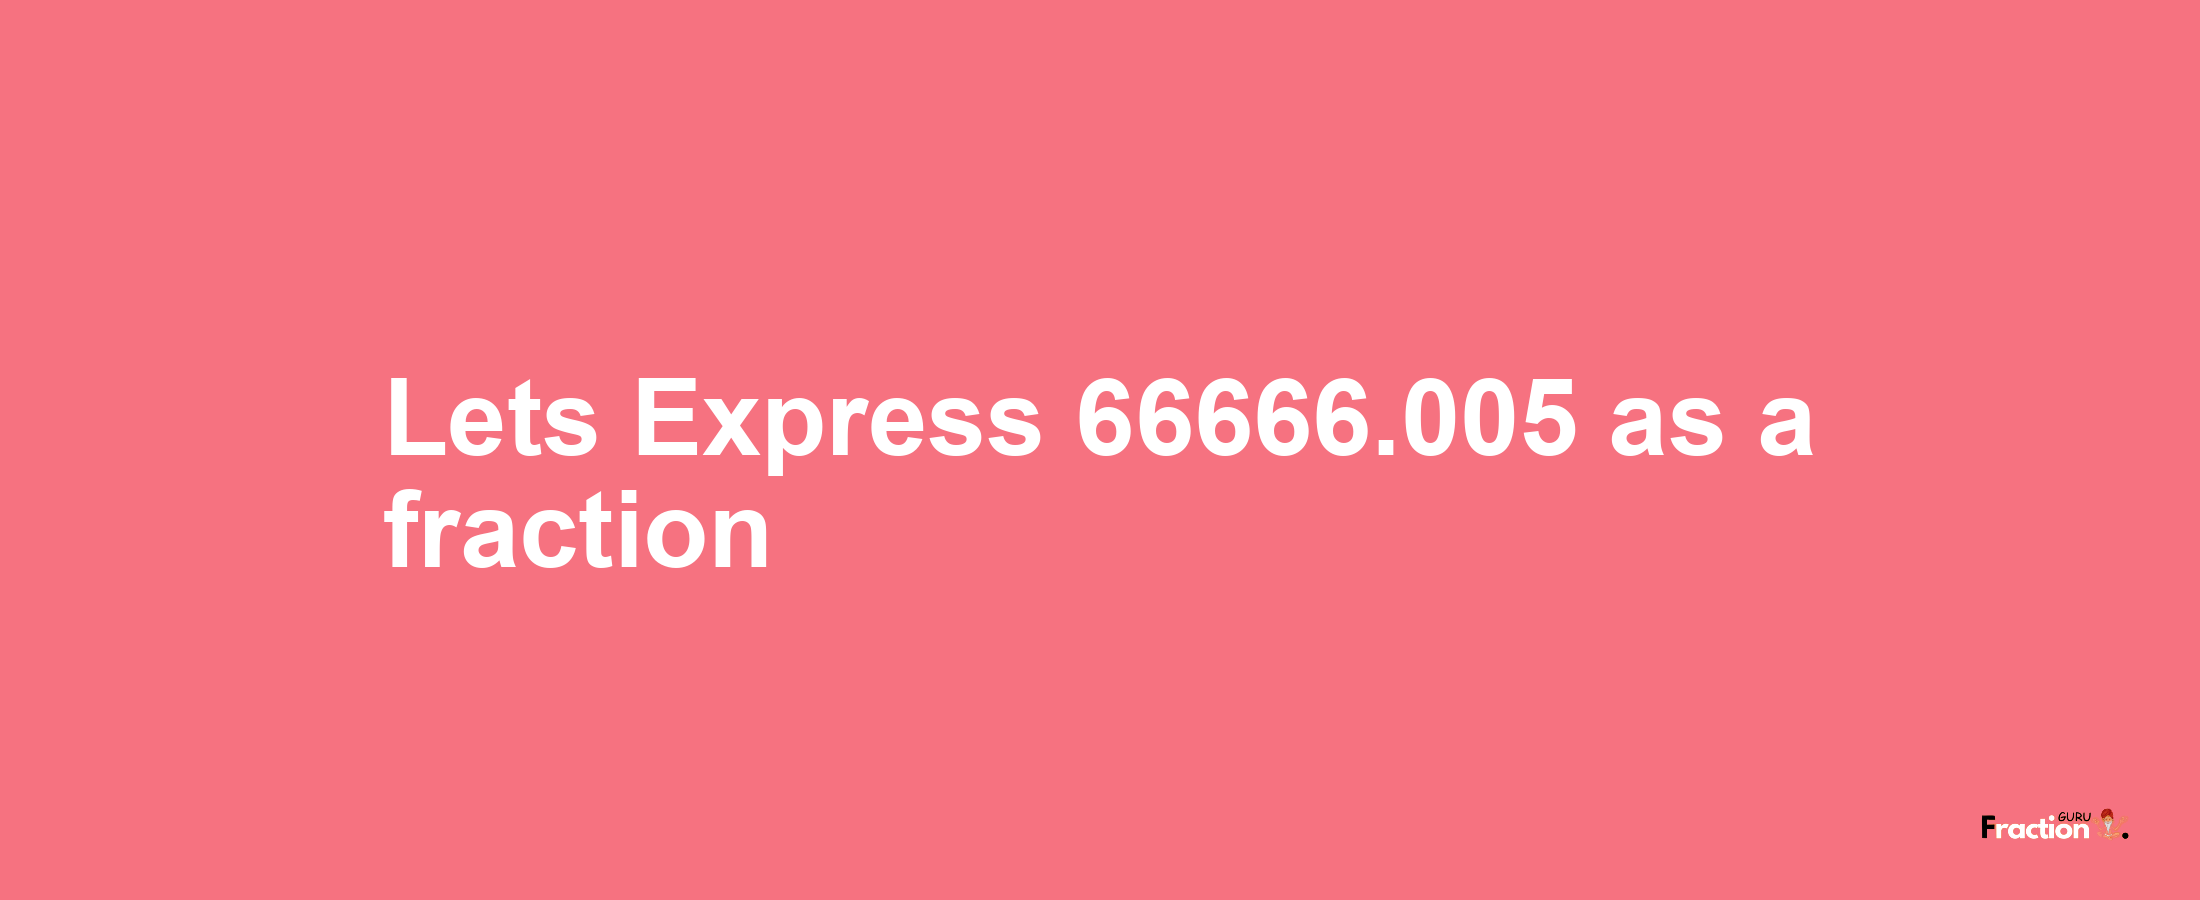 Lets Express 66666.005 as afraction